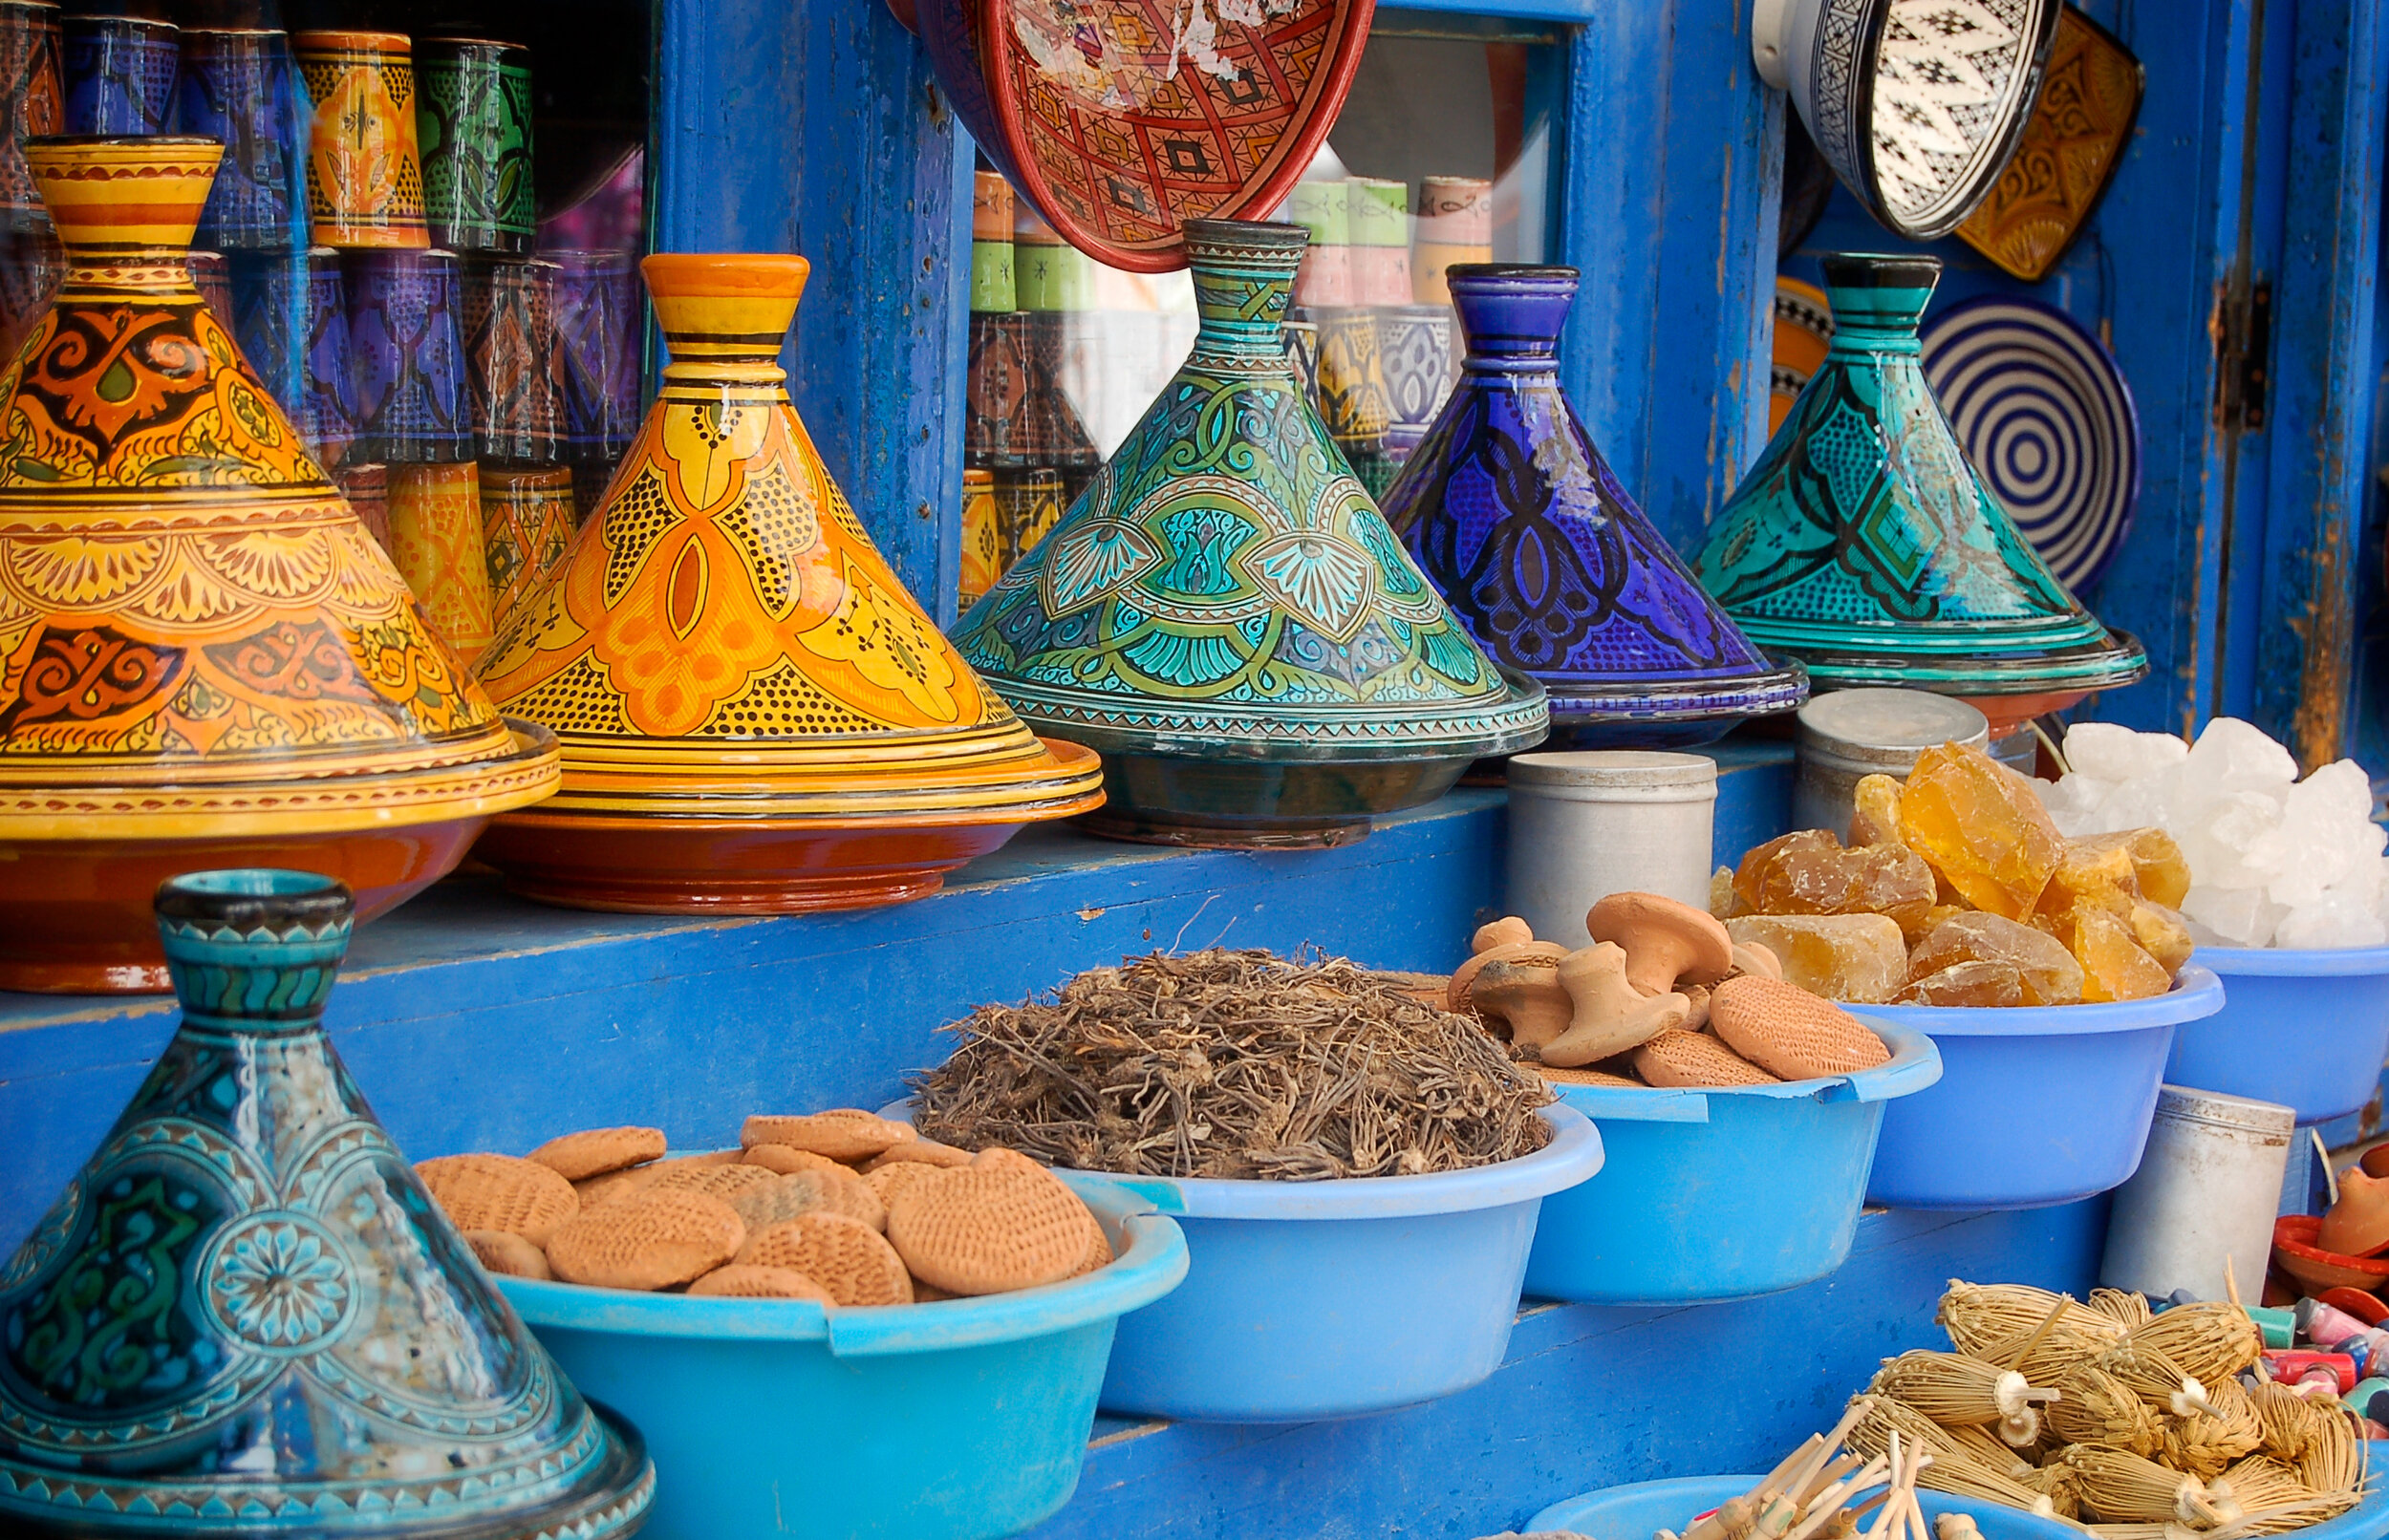  Colorful tagine plates at a souk (store) in Morocco 